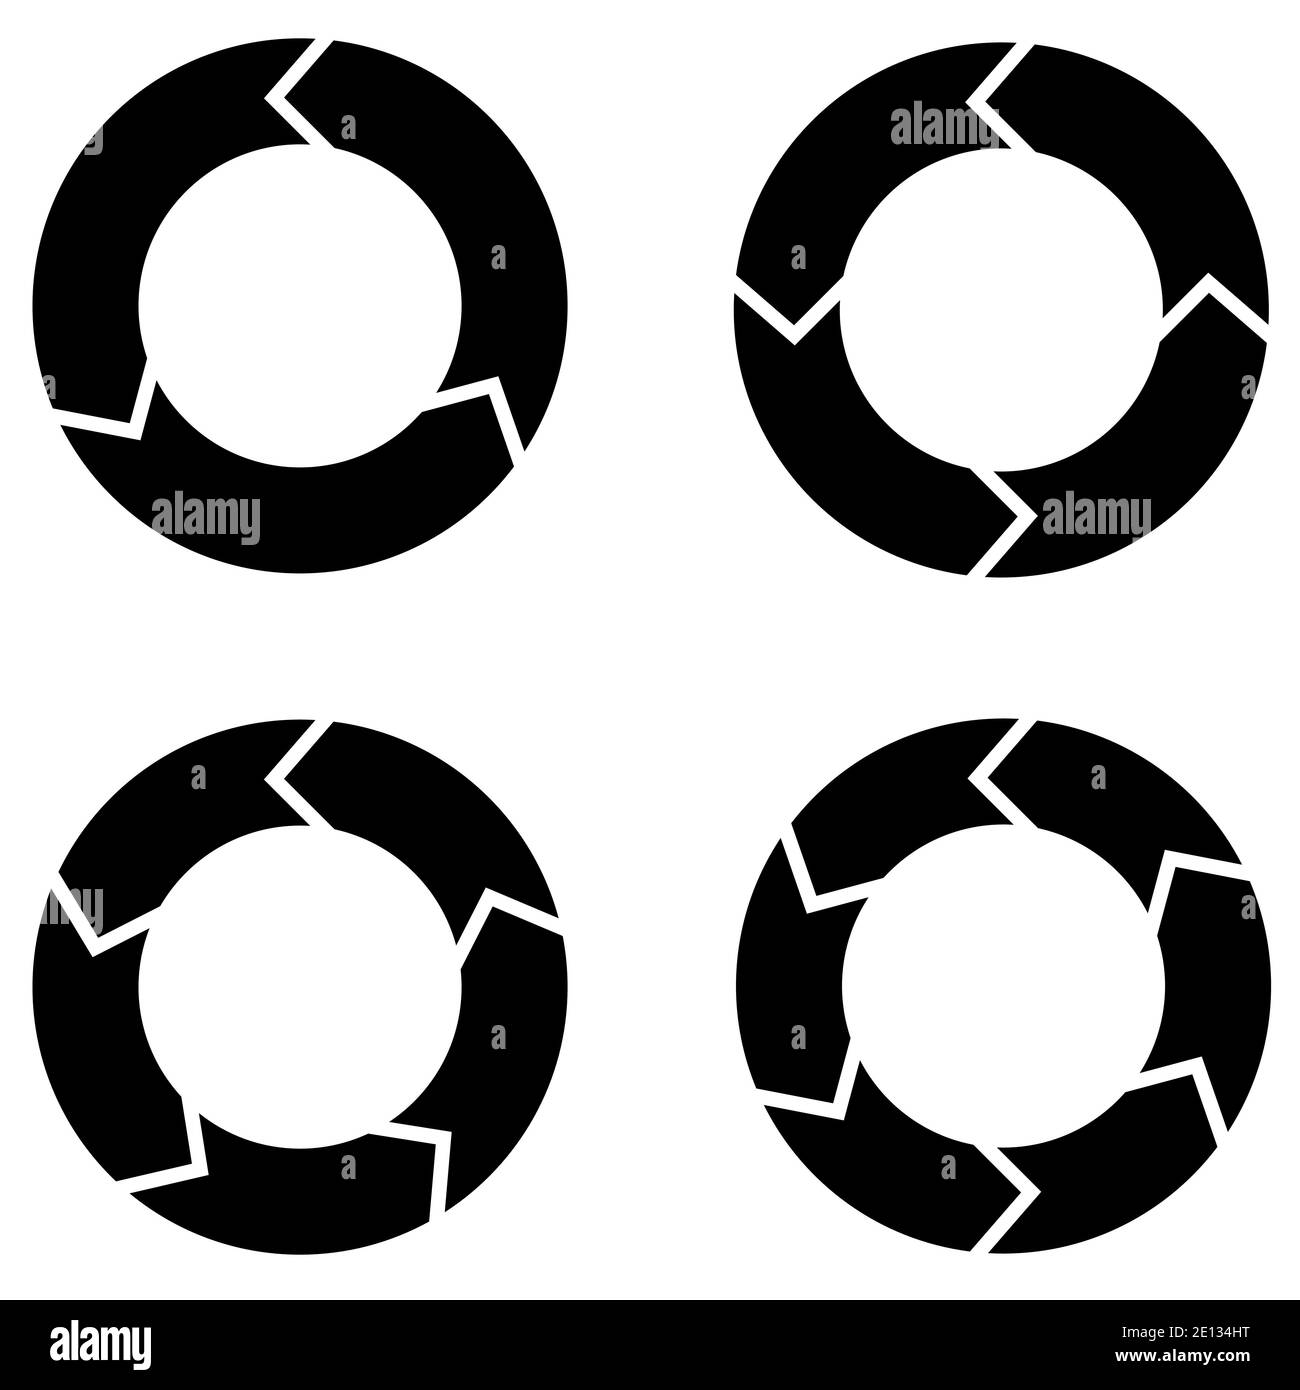 Set of circular diagrams with rotation. Black on white background. Stock Vector